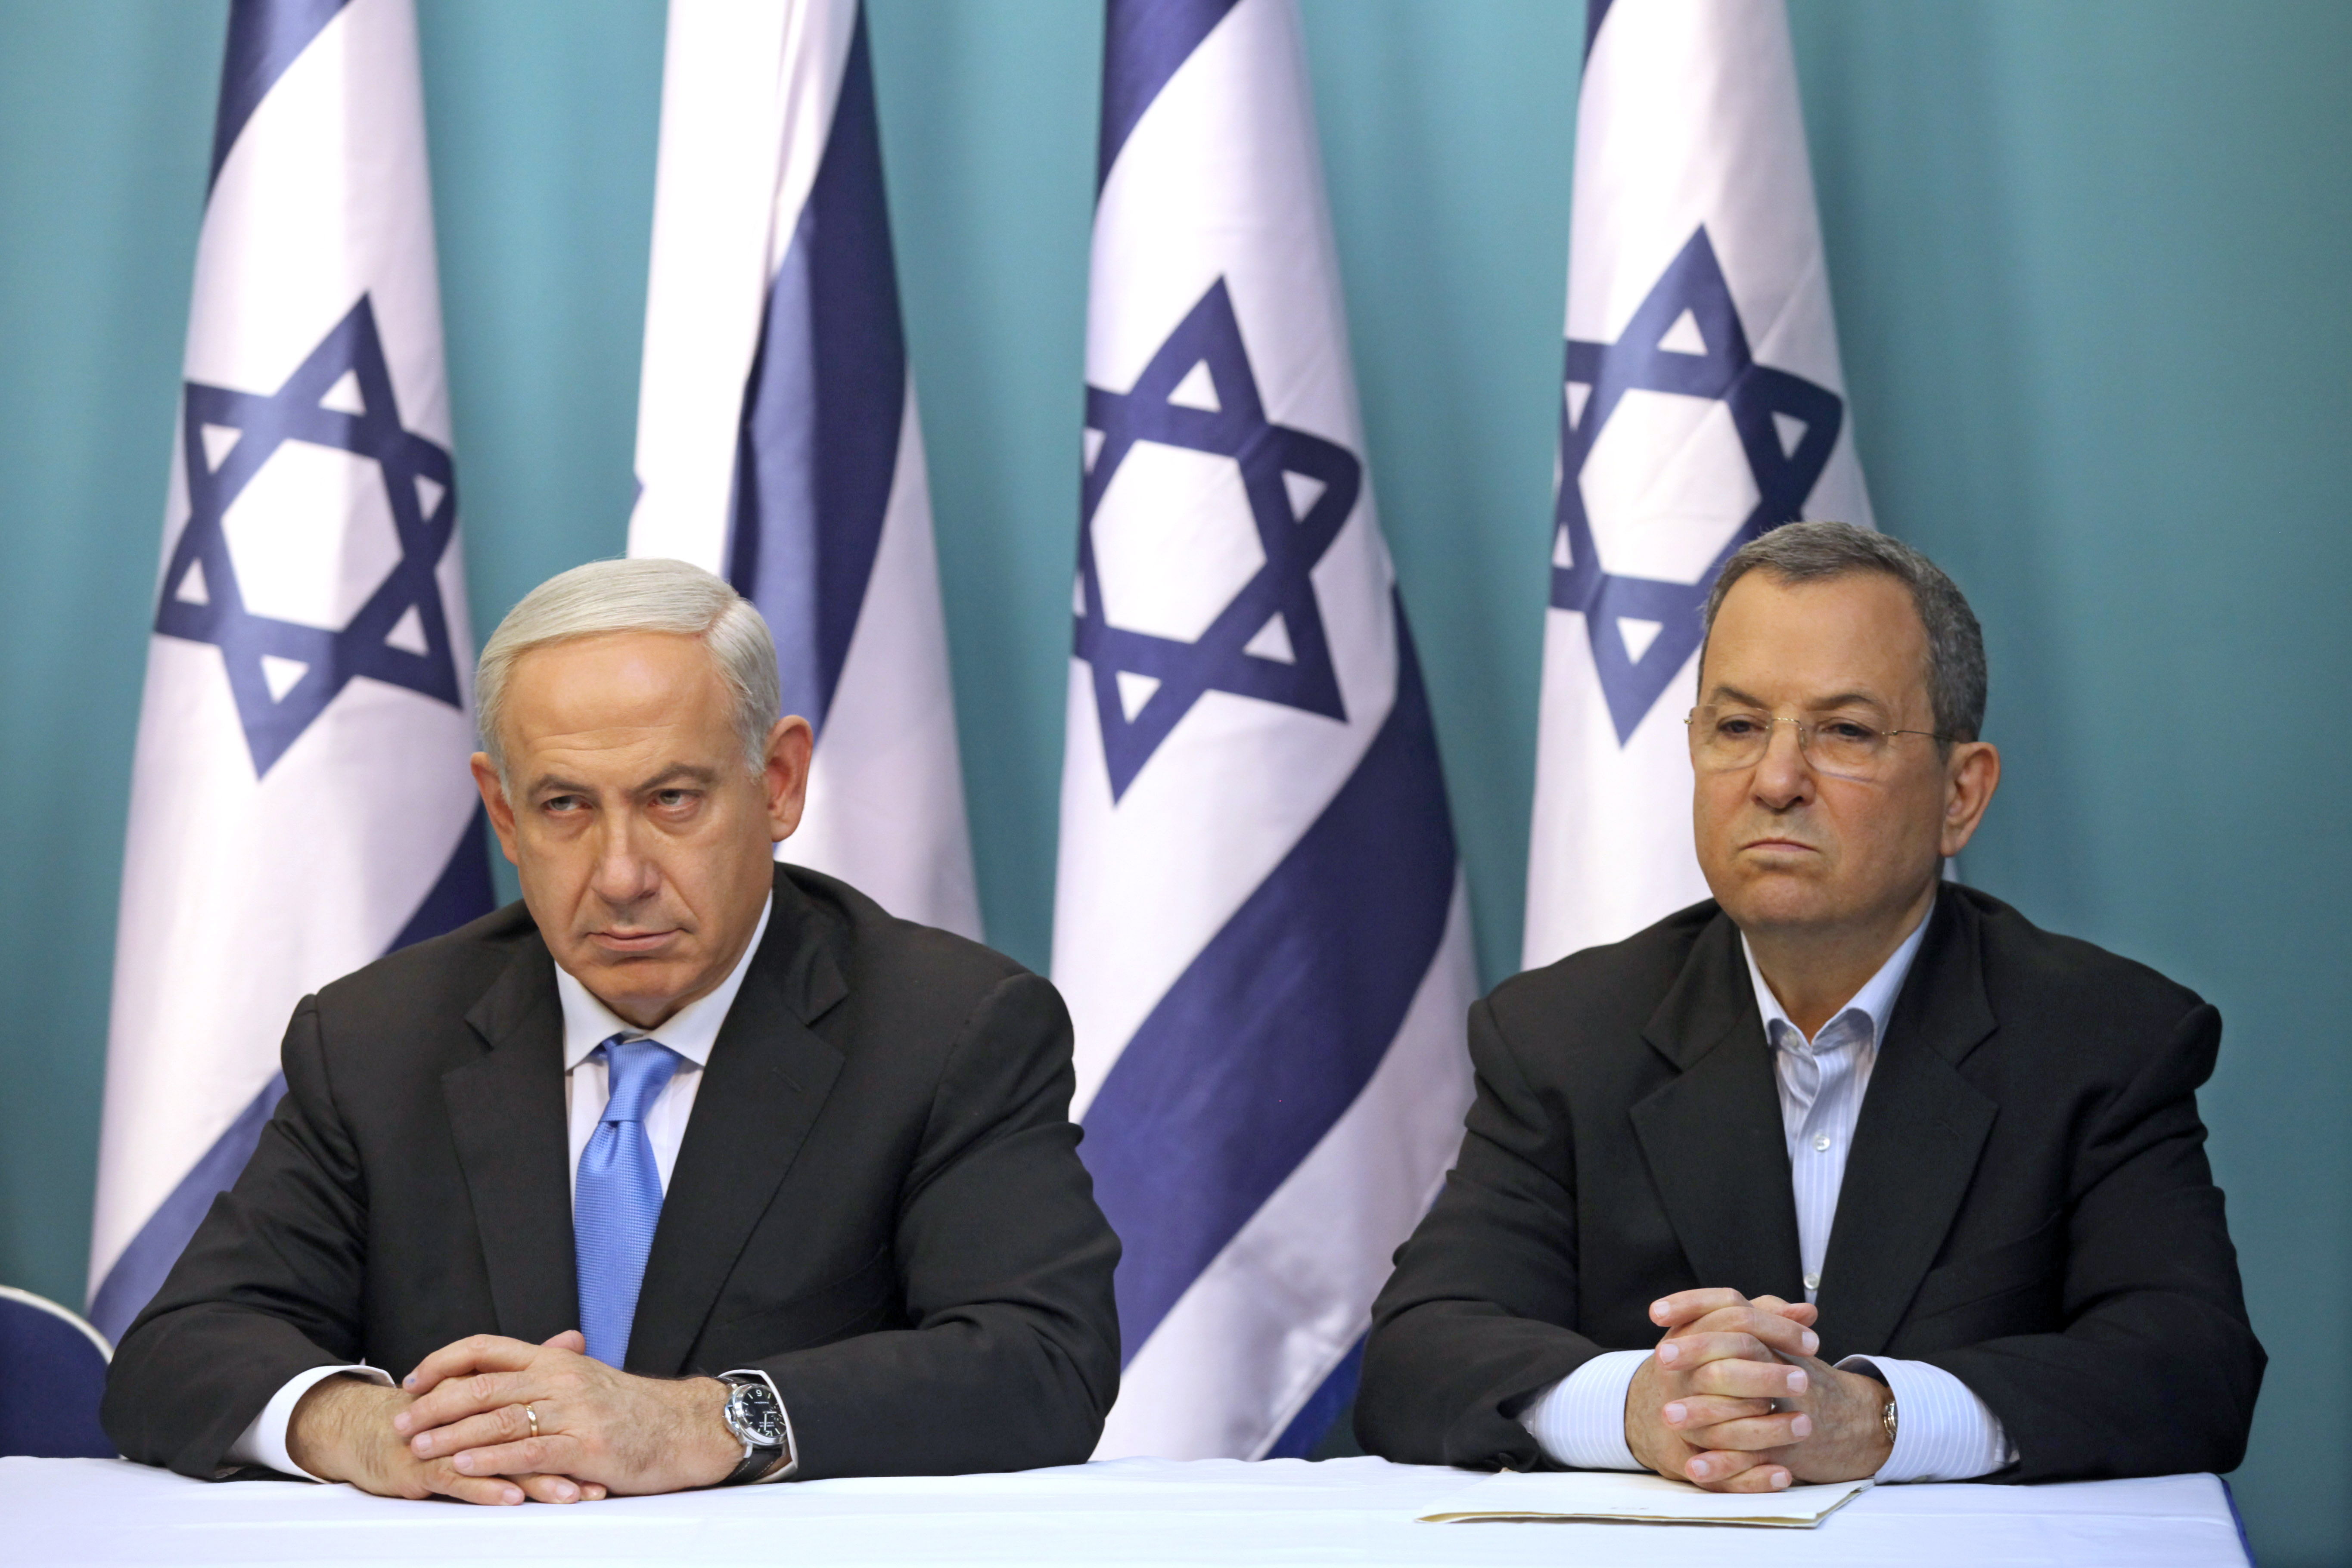 epa07676305 (FILE) - Israeli Prime Minister Benjamin Netanyahu (L) sits next to then Israeli Defense Minister Ehud Barak (R) during a press conference at the prime minister's office in Jerusalem, Israel, 21 November 2012 (reissued 27 June 2019). Former Israeli prime minister and defense minister Ehud Barak announced at a press conference on 26 June 2019 his intention to return to political life with a new party in order to challenge Netanyahu in the upcoming 17 September 2019 Israeli legislative election.  EPA/ABIR SULTAN